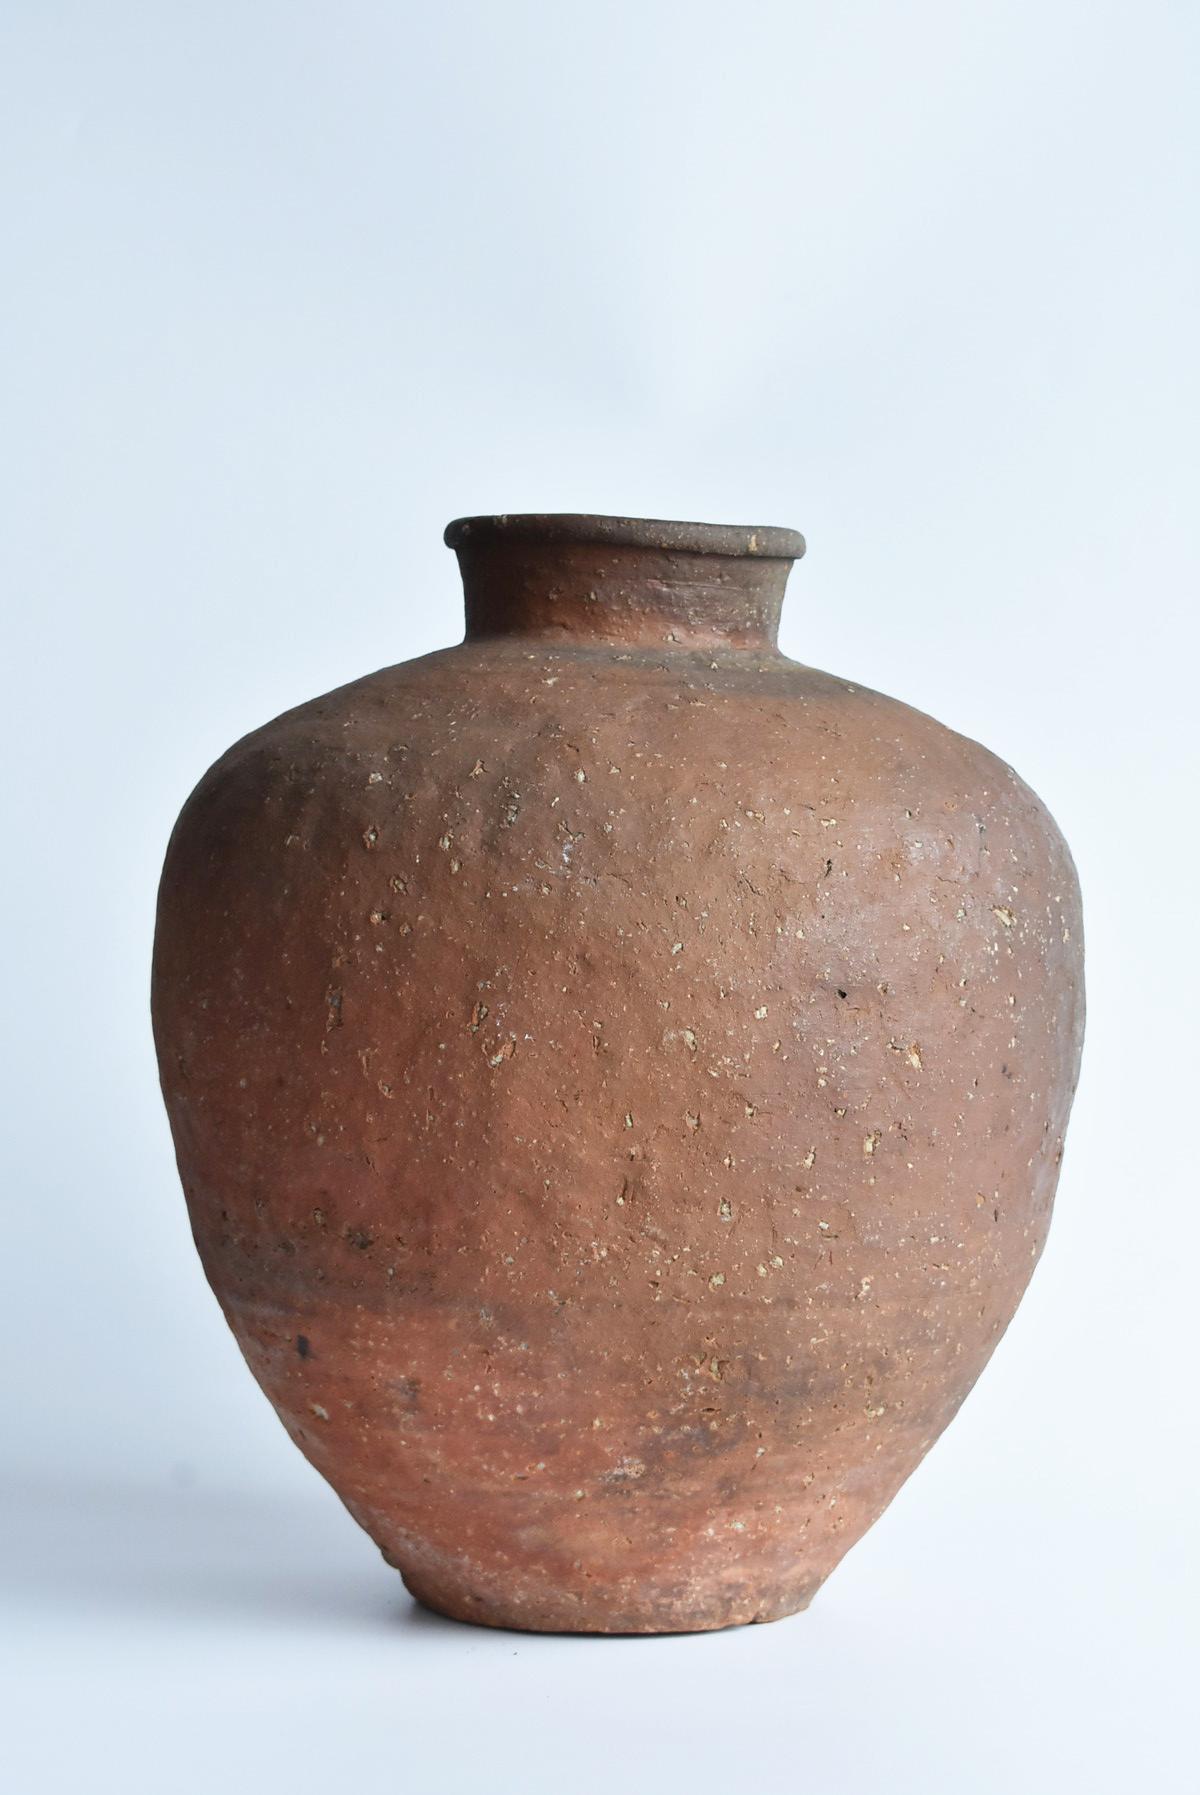 This is a jar made from the end of the Muromachi period to the Momoyama period (around 1500 to 1600).
As some of you may know, this is a 